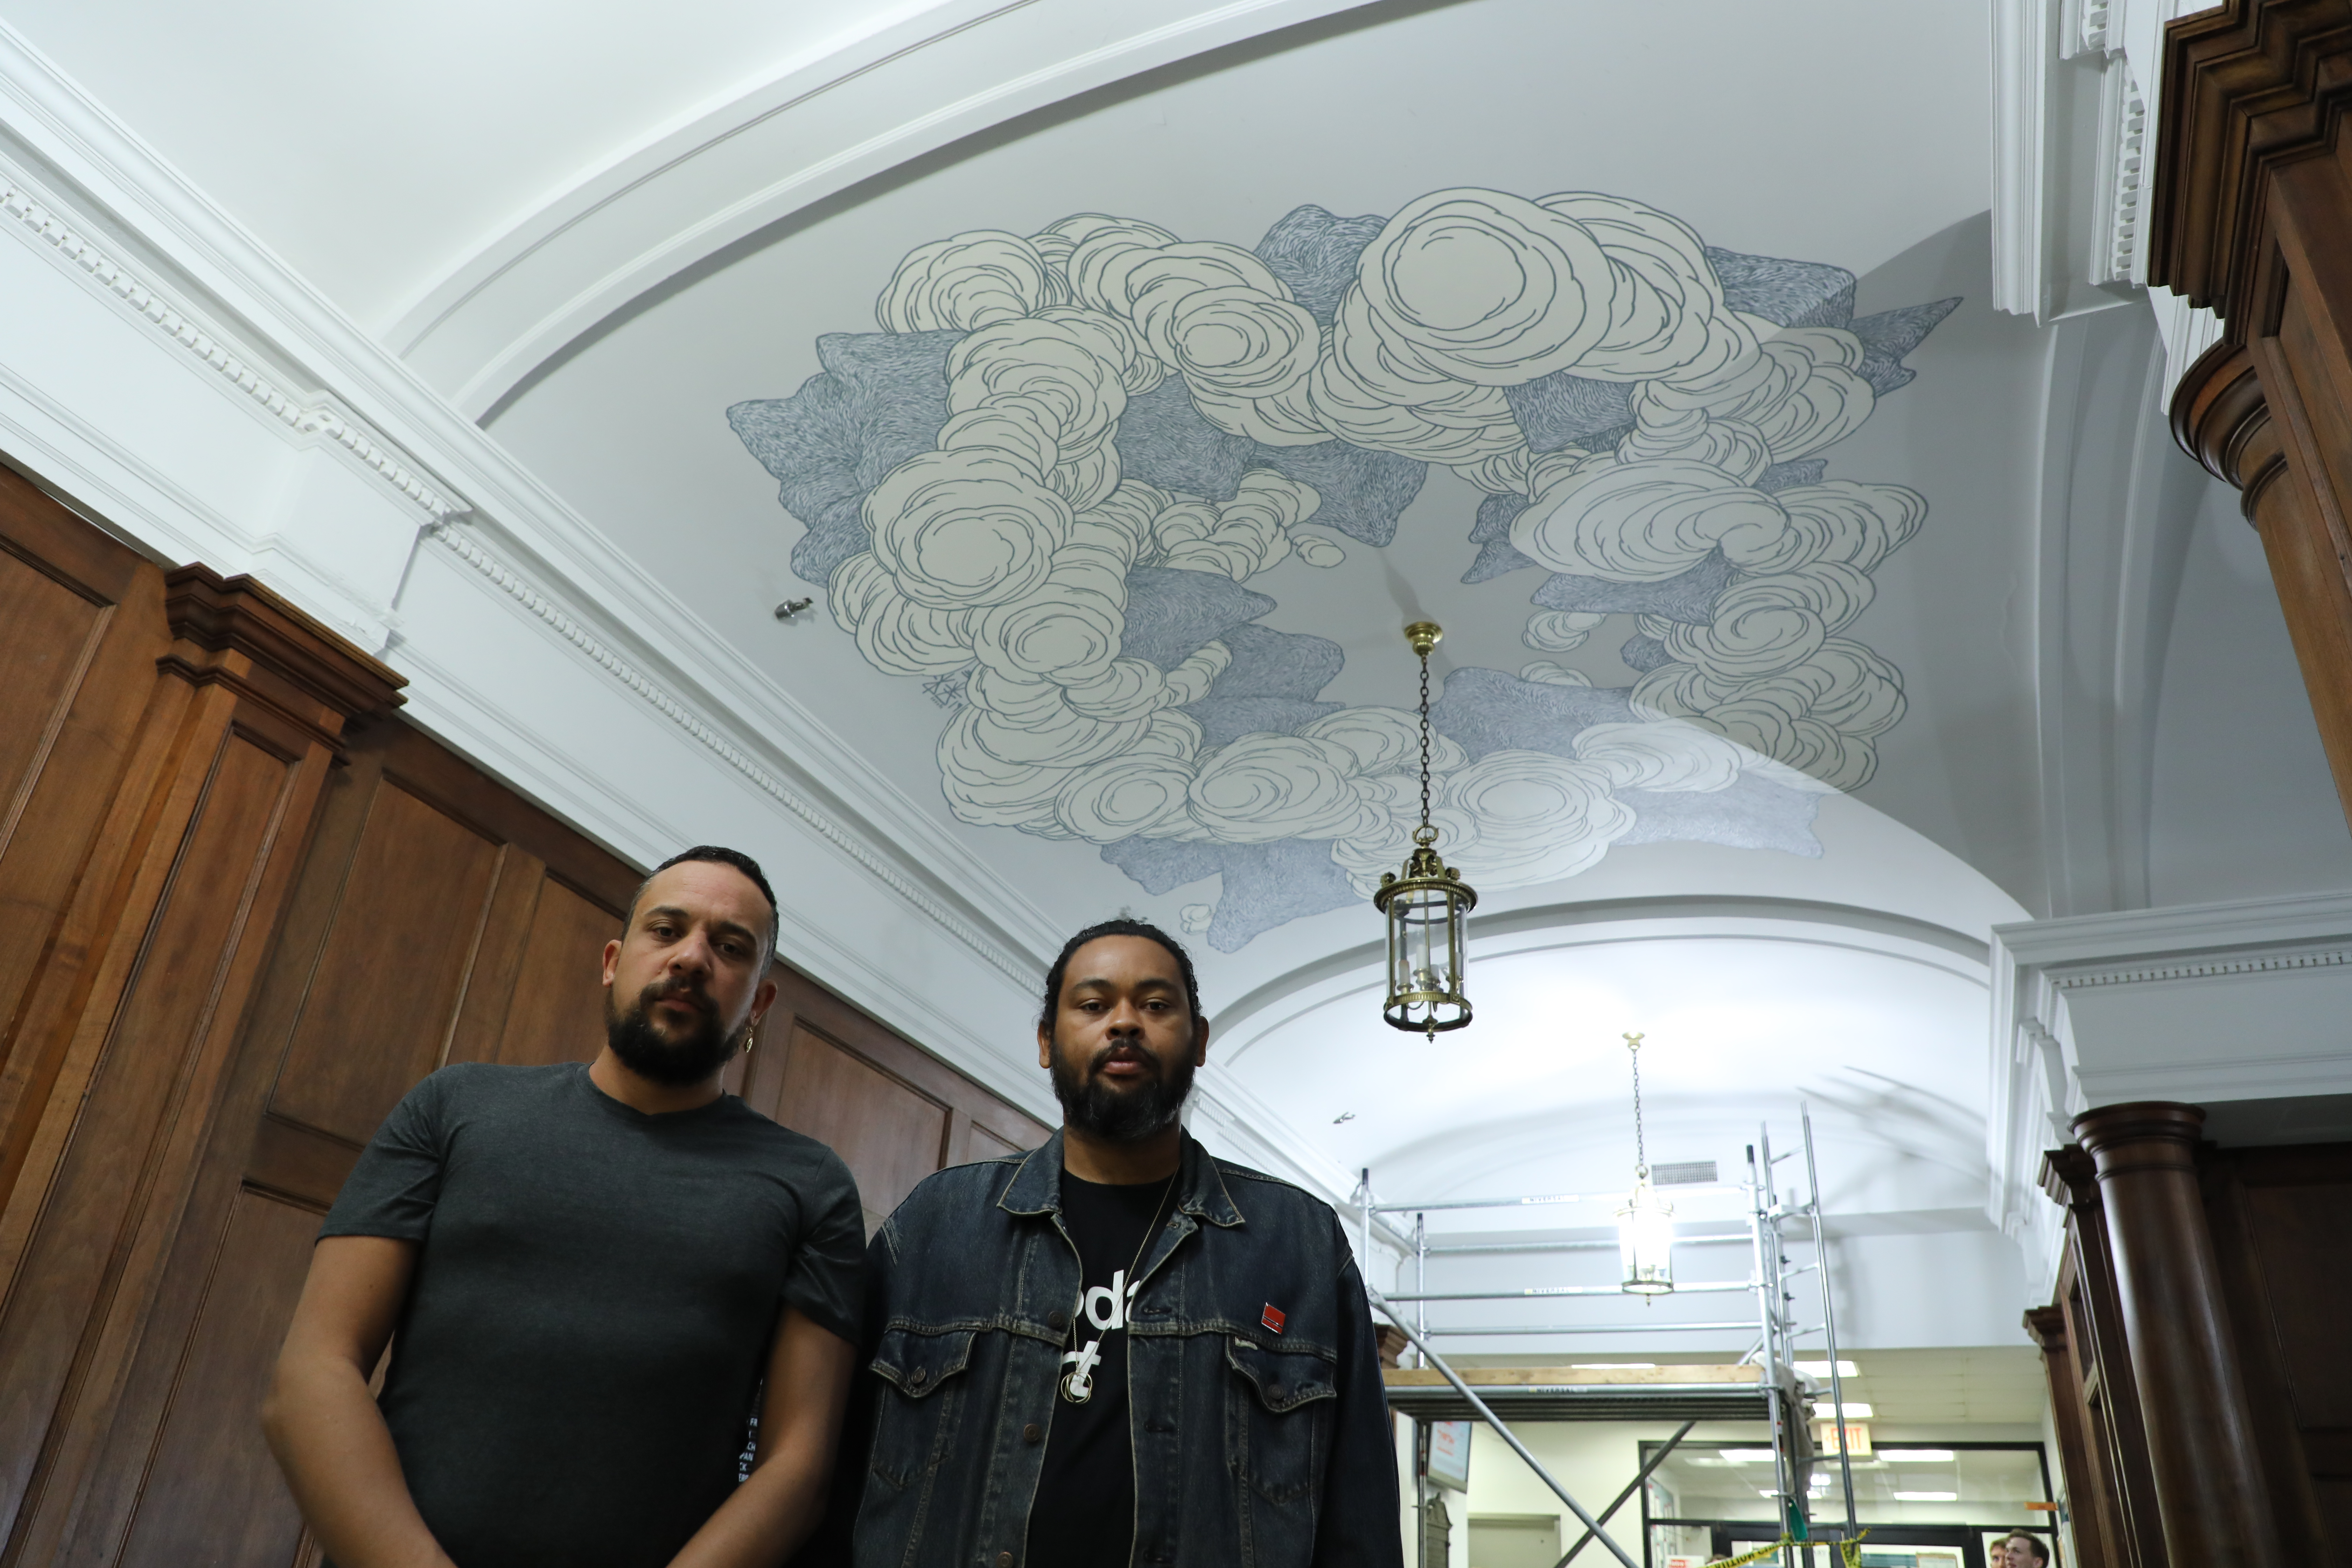 Reunion Island artists Kid Kreol and Boogie with their mural on the Washington Hall lobby ceiling